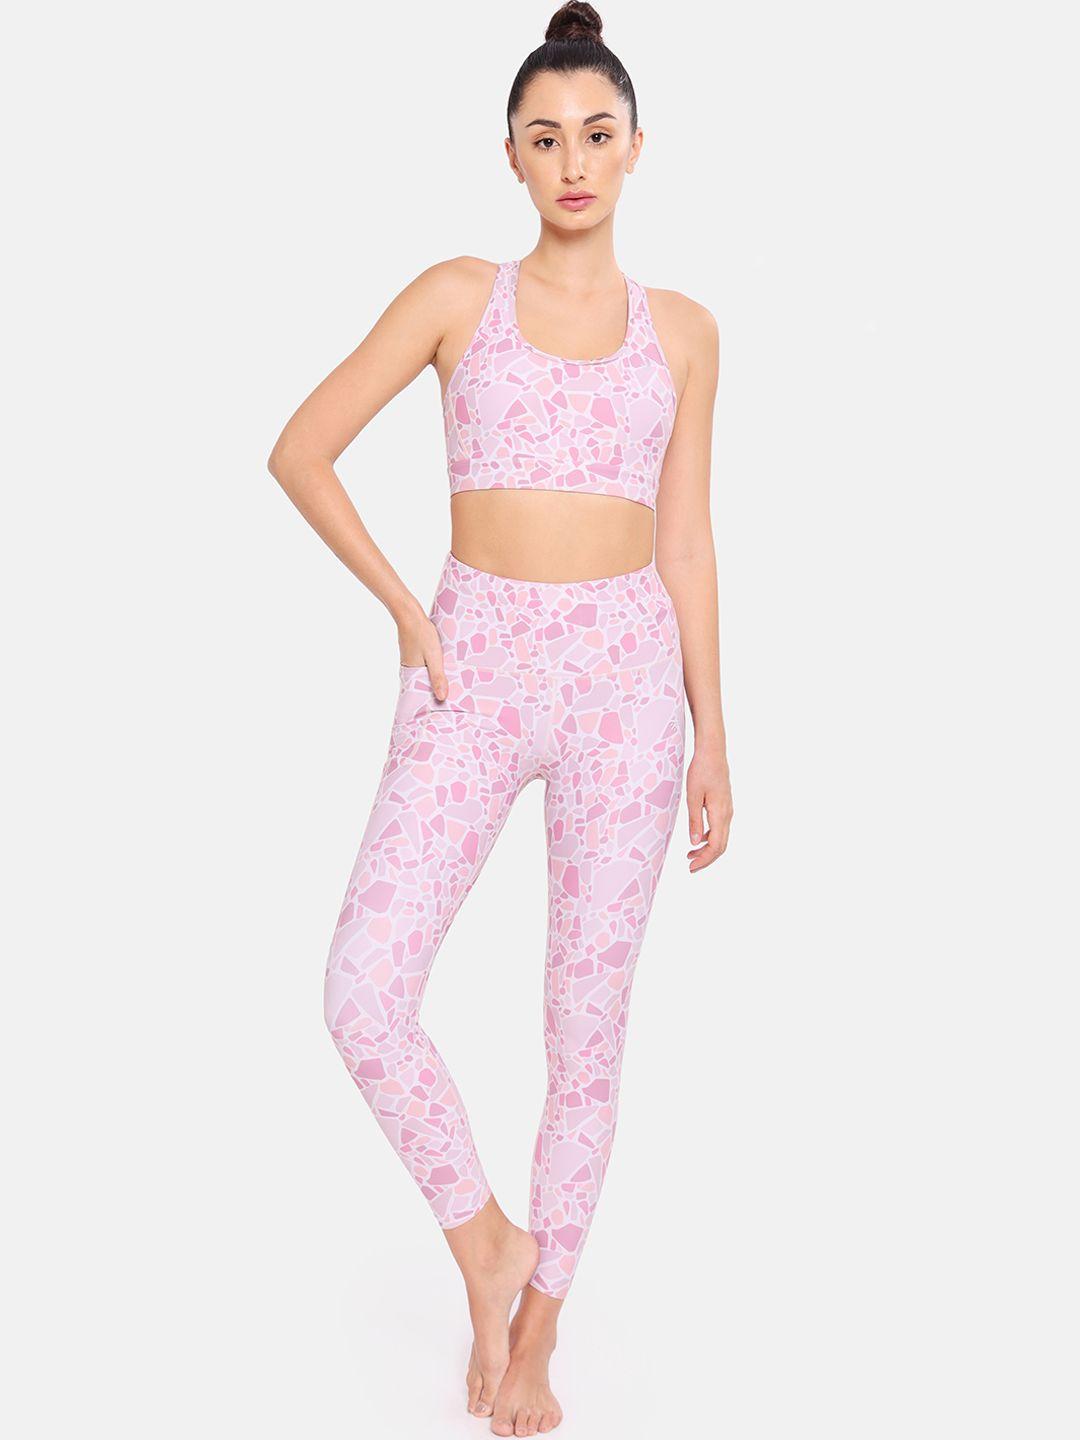 cultsport abstract printed yoga top with leggings